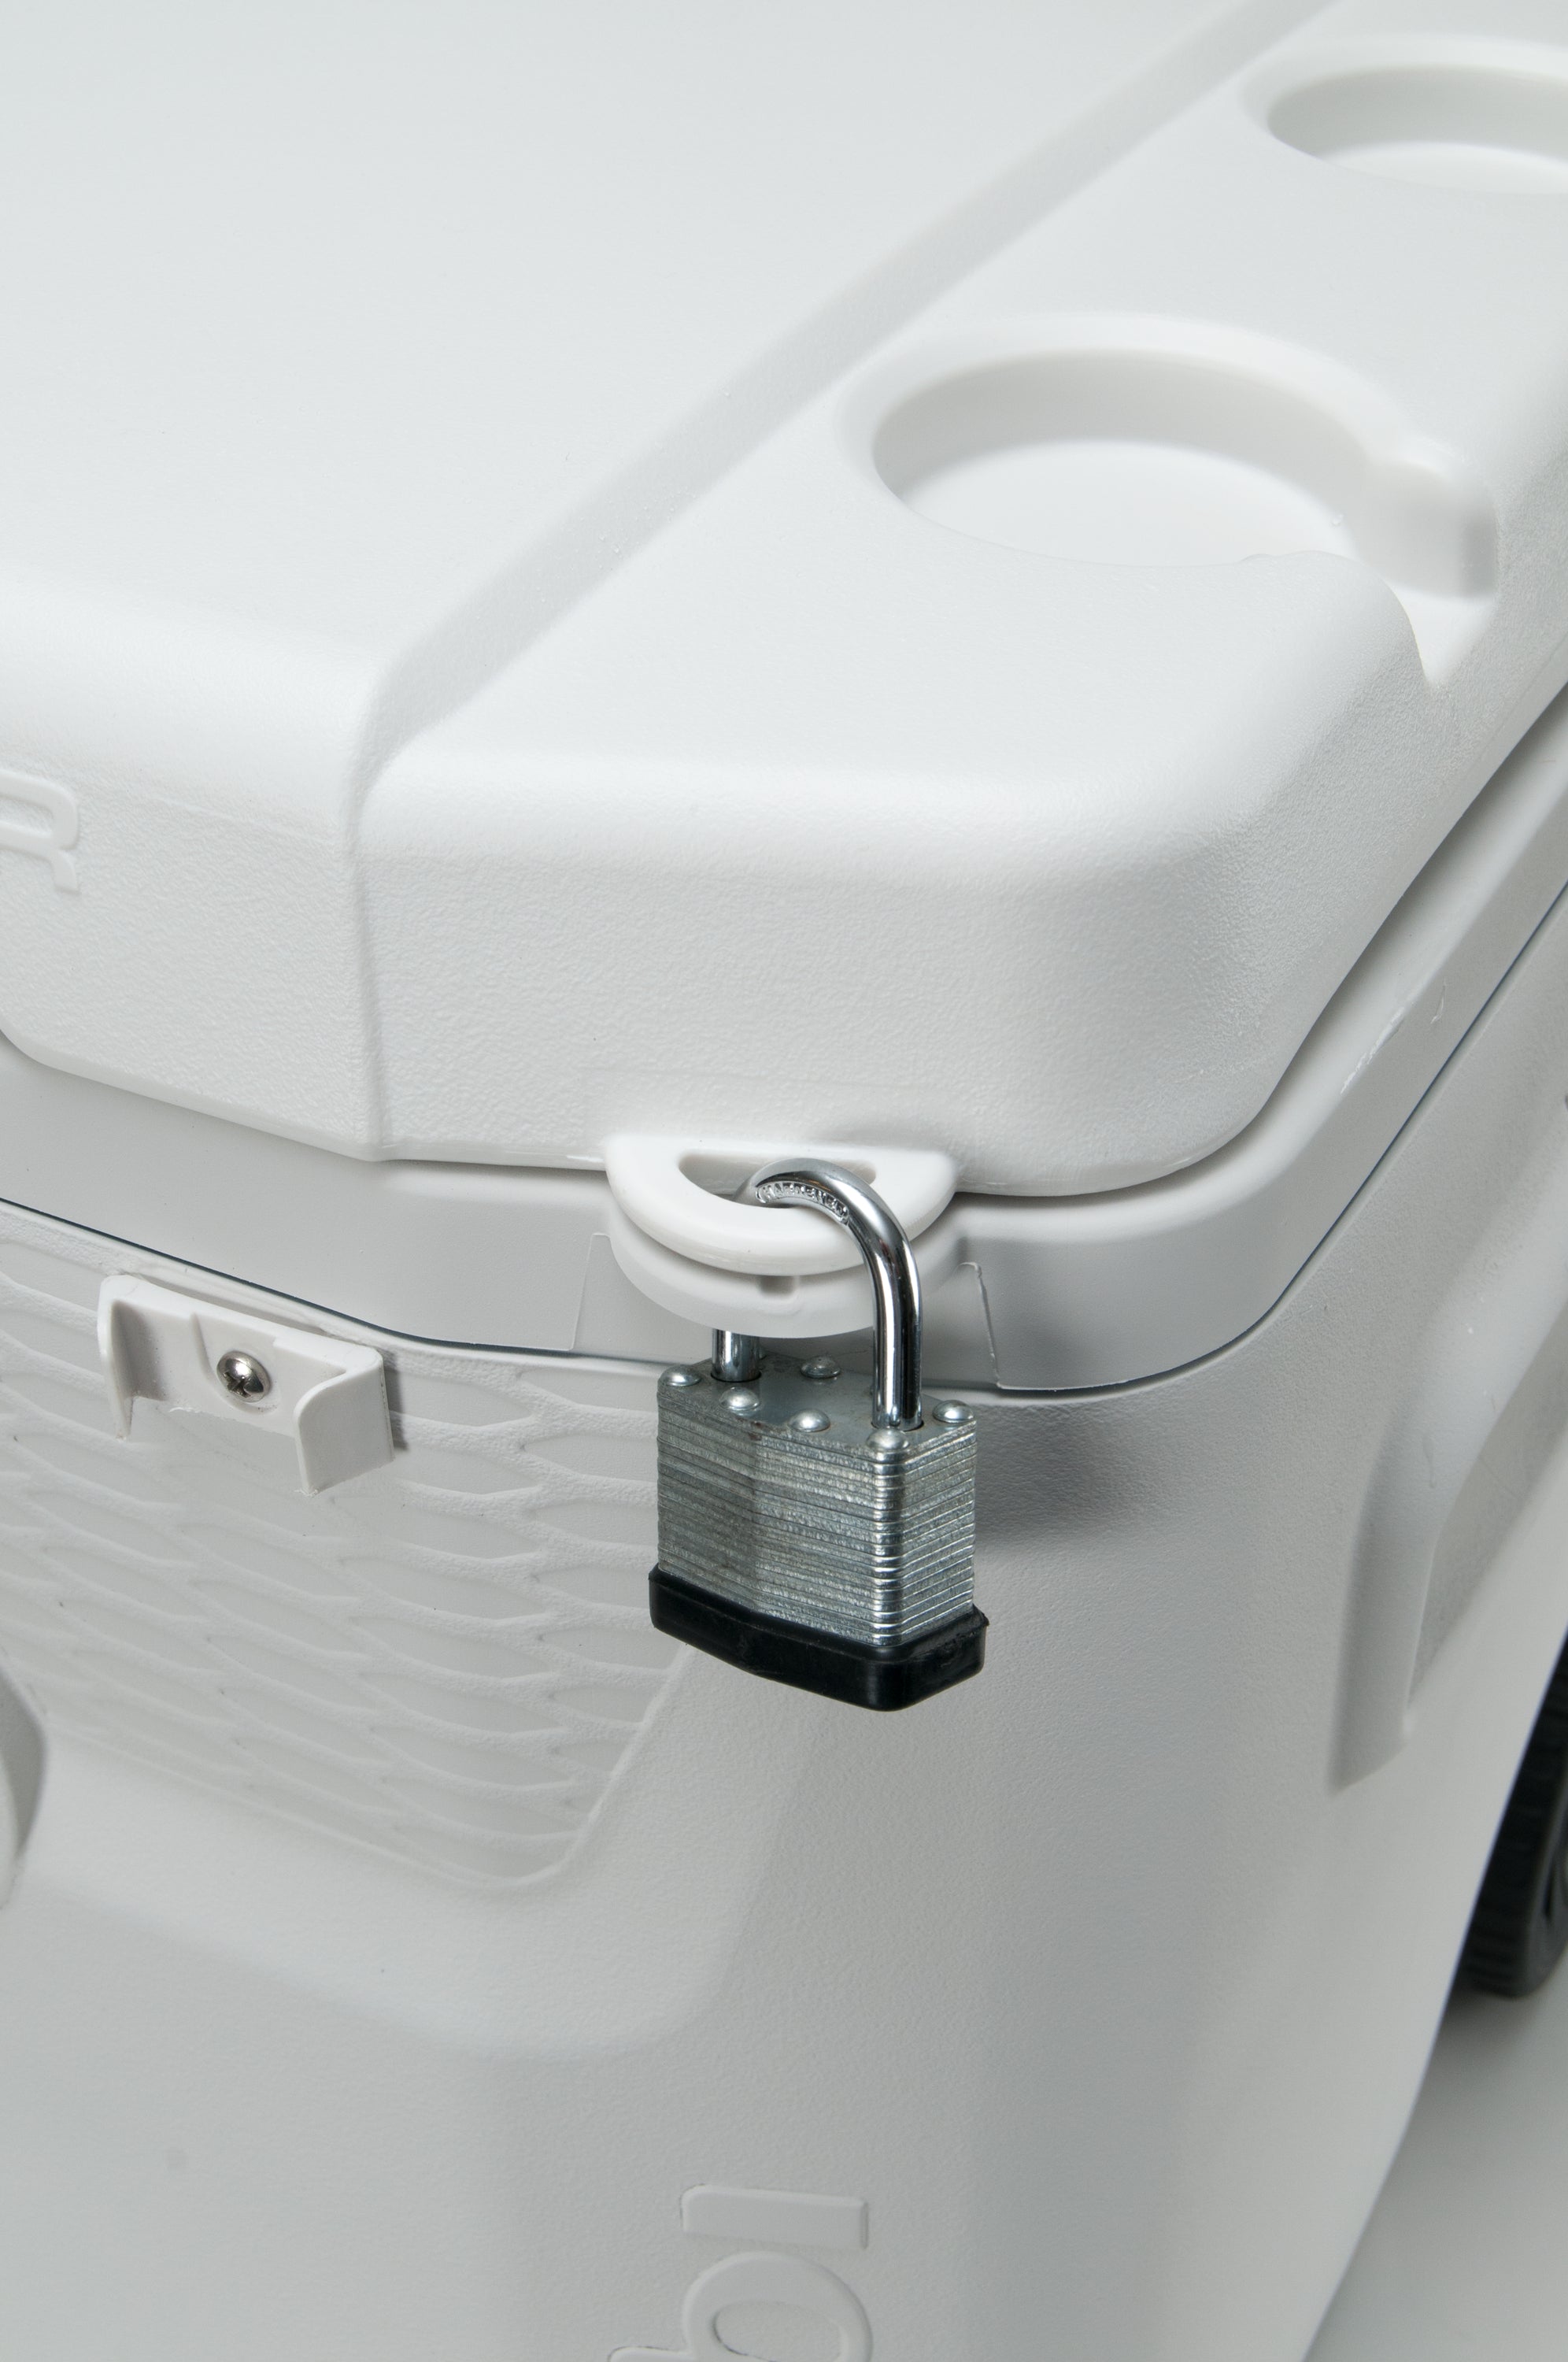 Igloo 52 qt. 5-Day Marine Ice Chest Cooler with Wheels, White – HardGrizzly